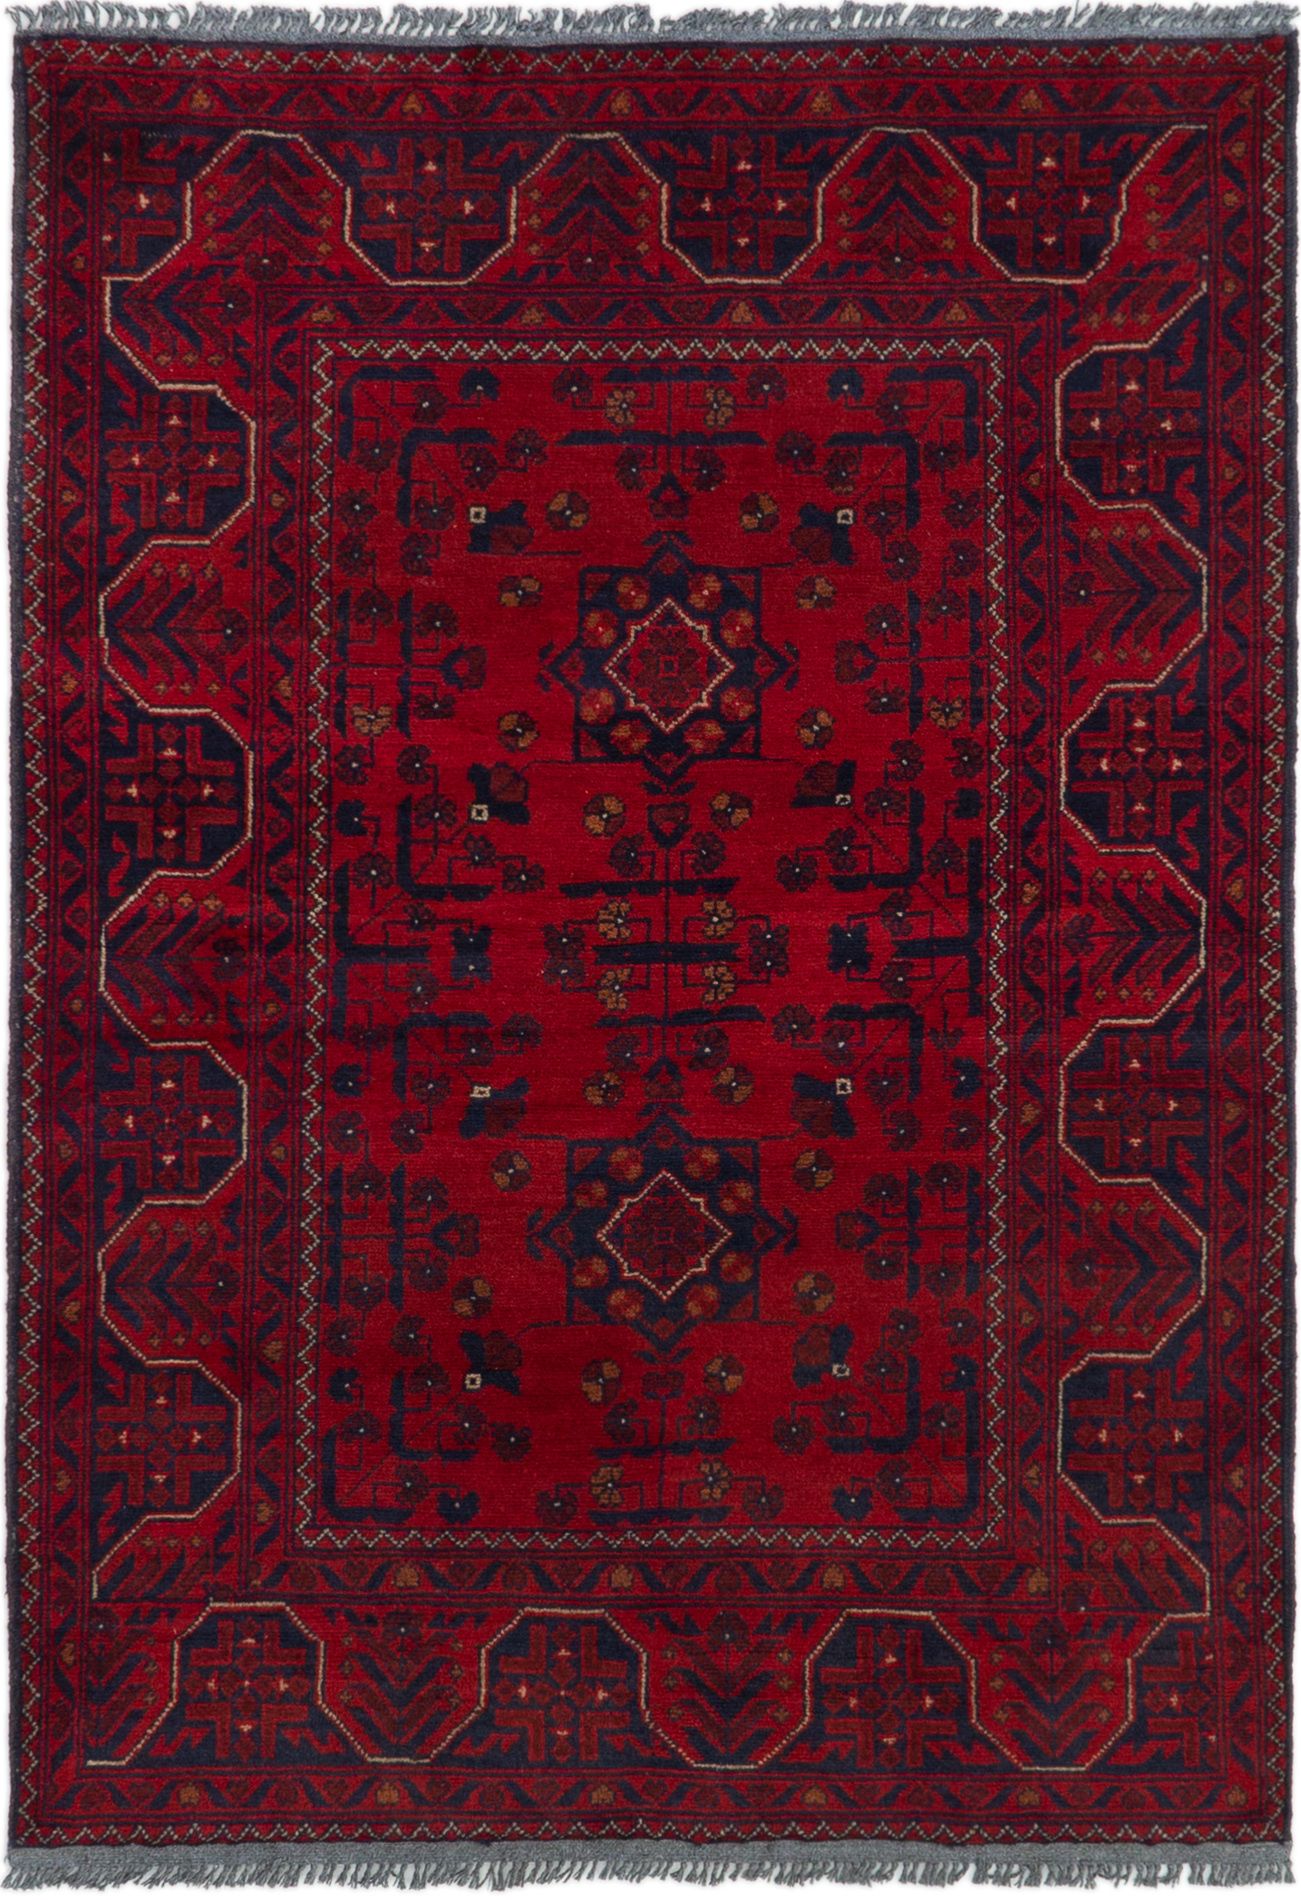 Hand-knotted Finest Khal Mohammadi Red Wool Rug 3'4" x 4'10" (36) Size: 3'4" x 4'10"  